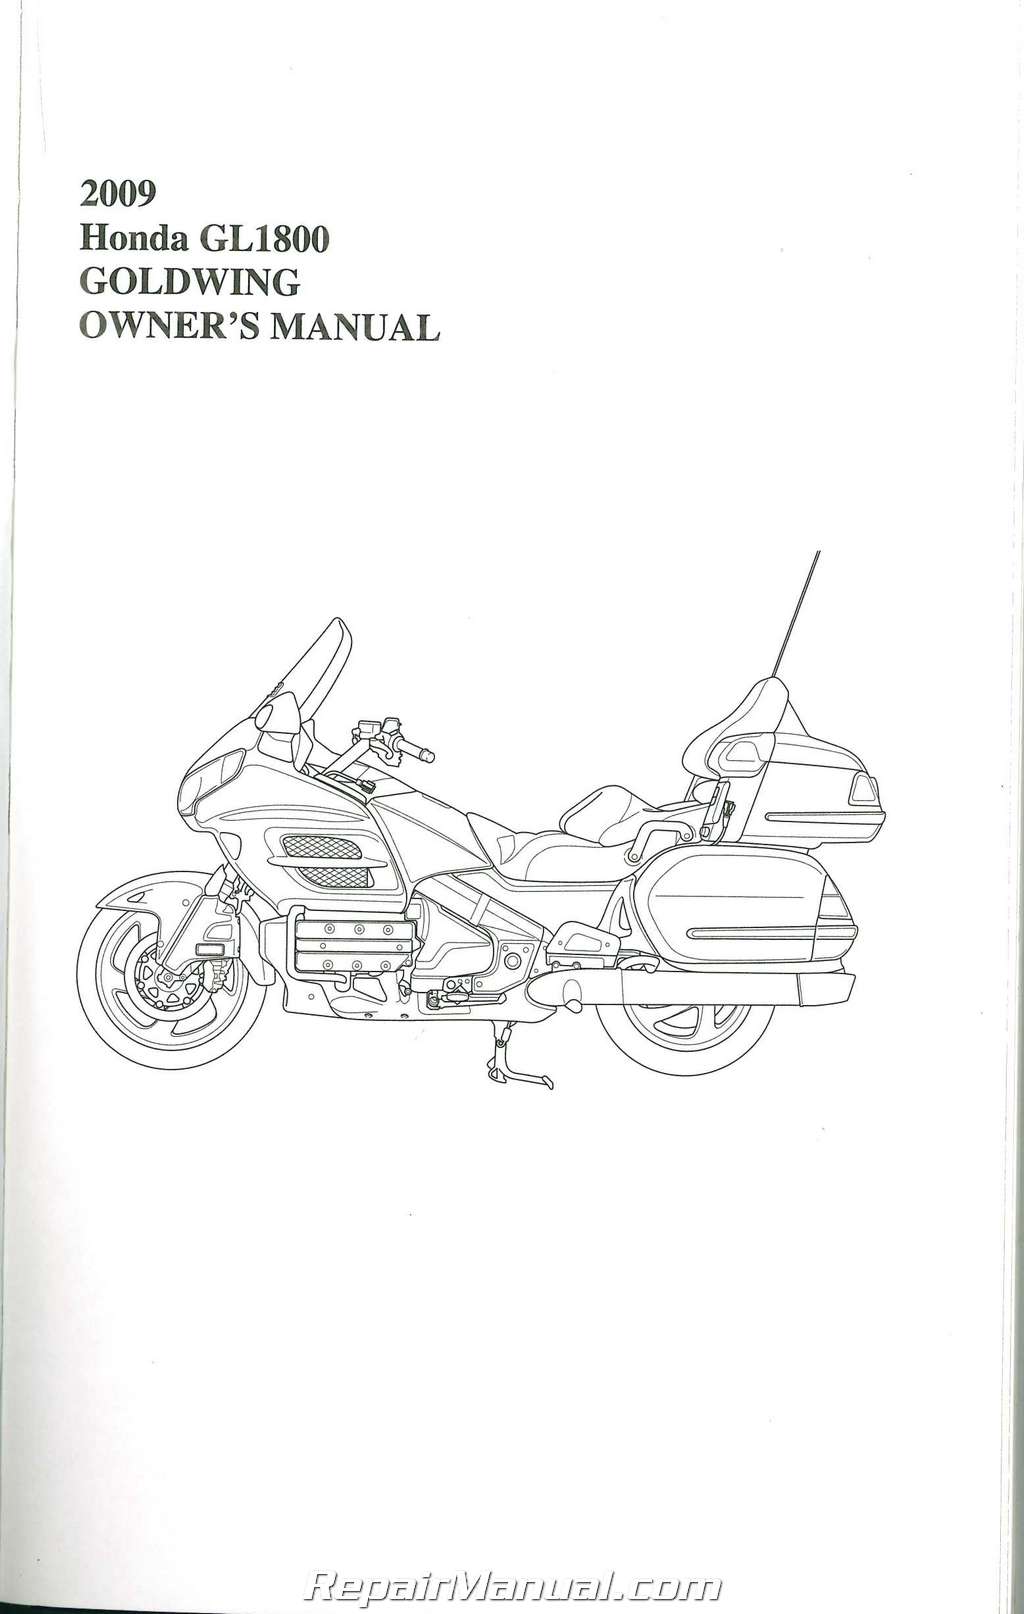 2009 Honda GL1800 Gold Wing Motorcycle Owners Manual